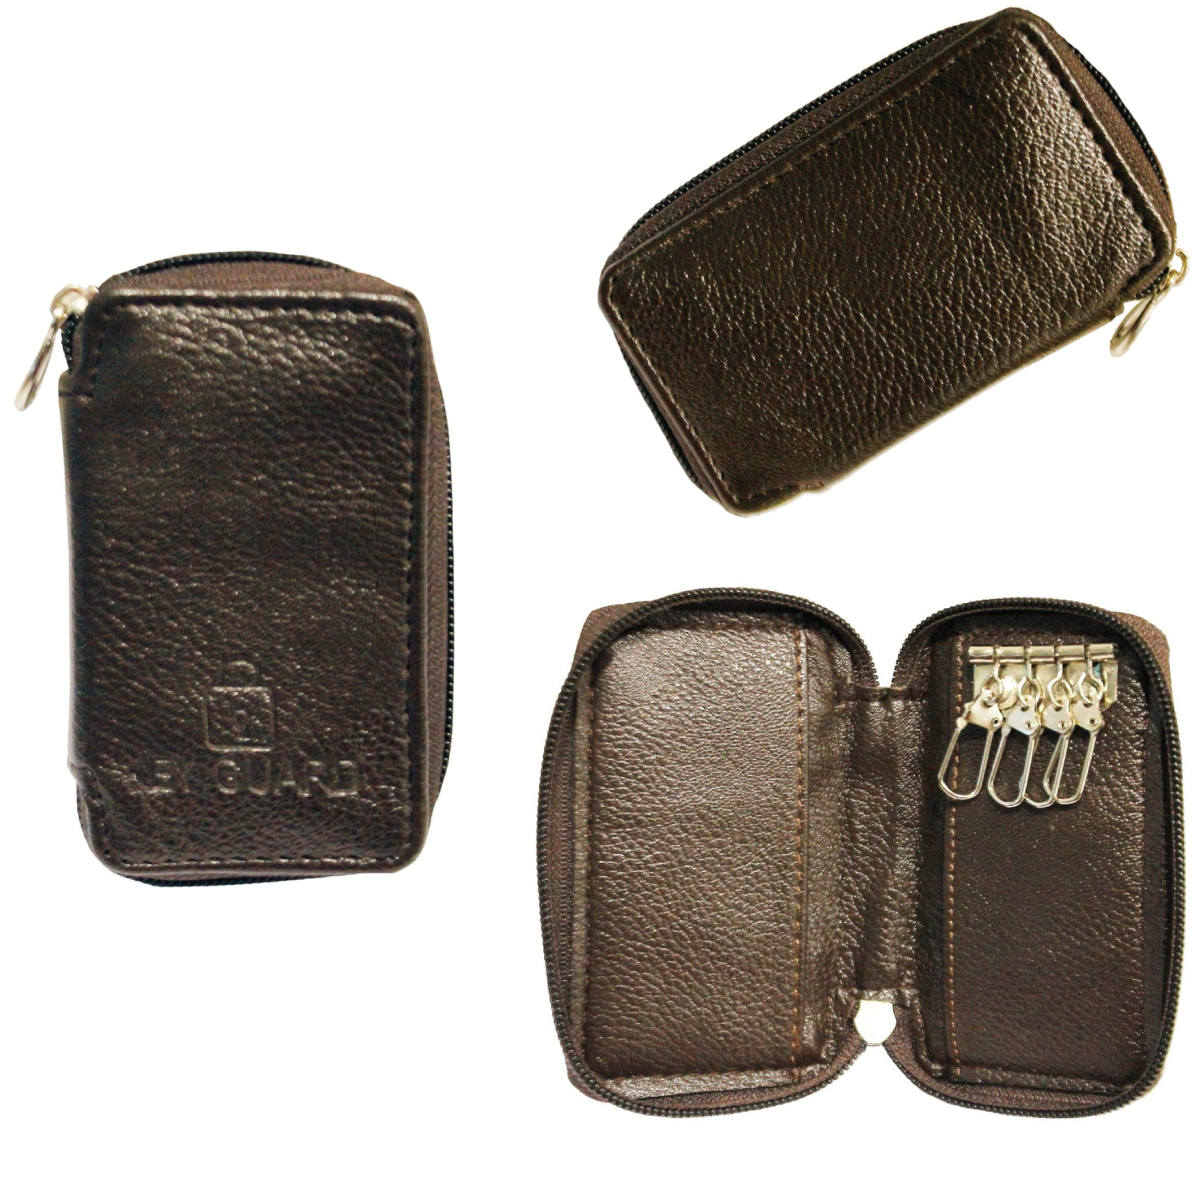 Brown 4 Inch Key Holder Guard Case - For Office Use, Personal Use, Corporate Gifting, Return Gift JAKGBR002